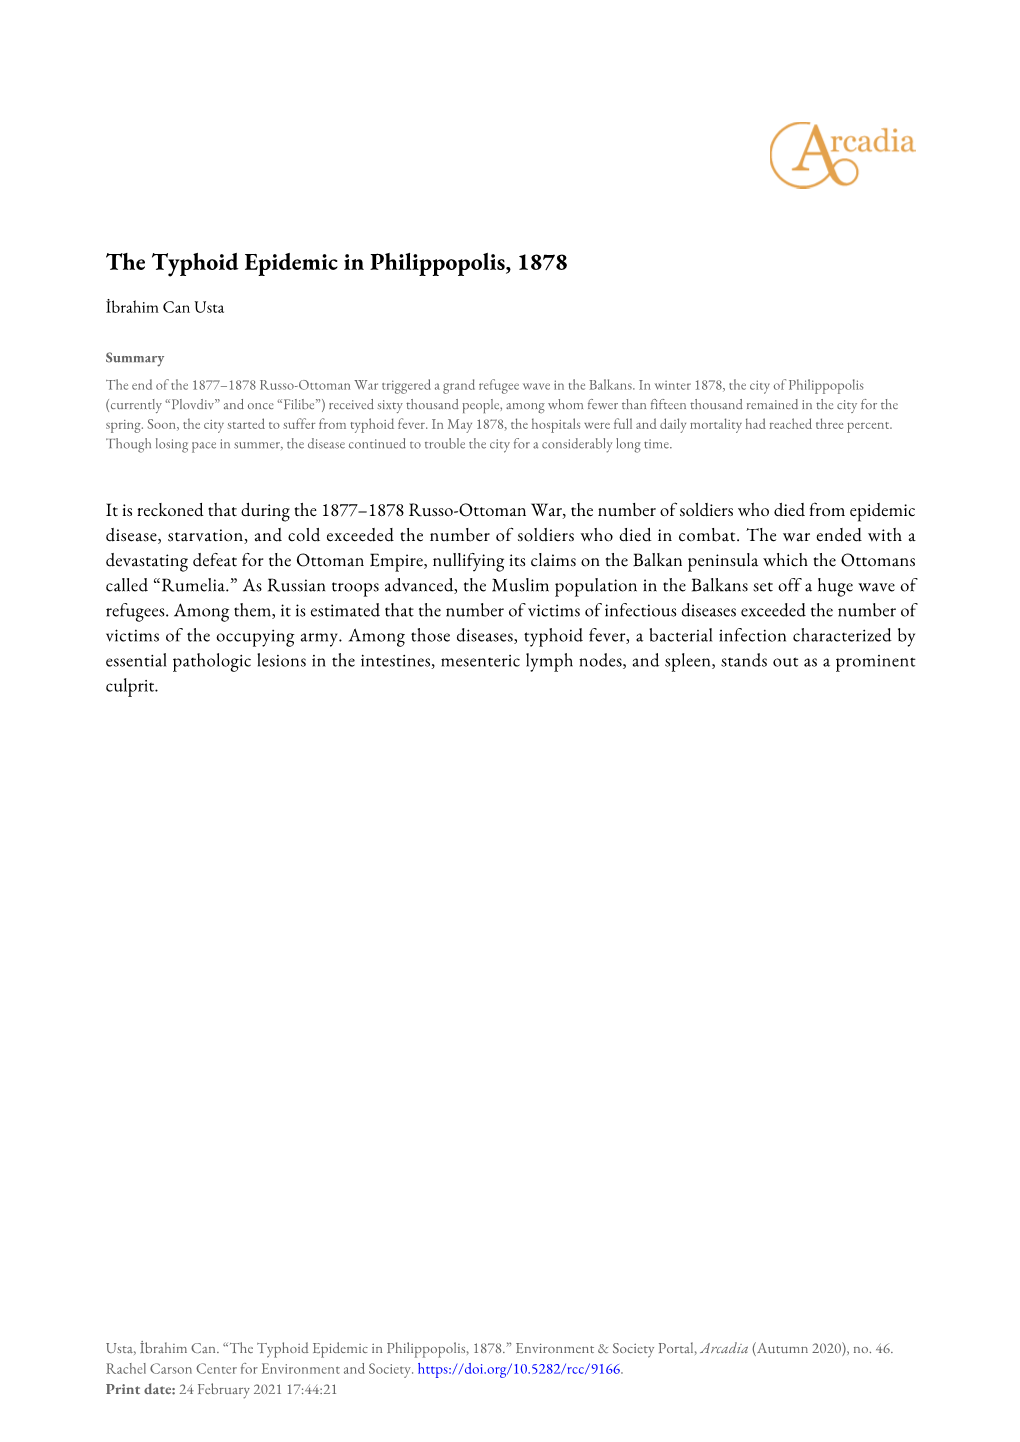 The Typhoid Epidemic in Philippopolis, 1878